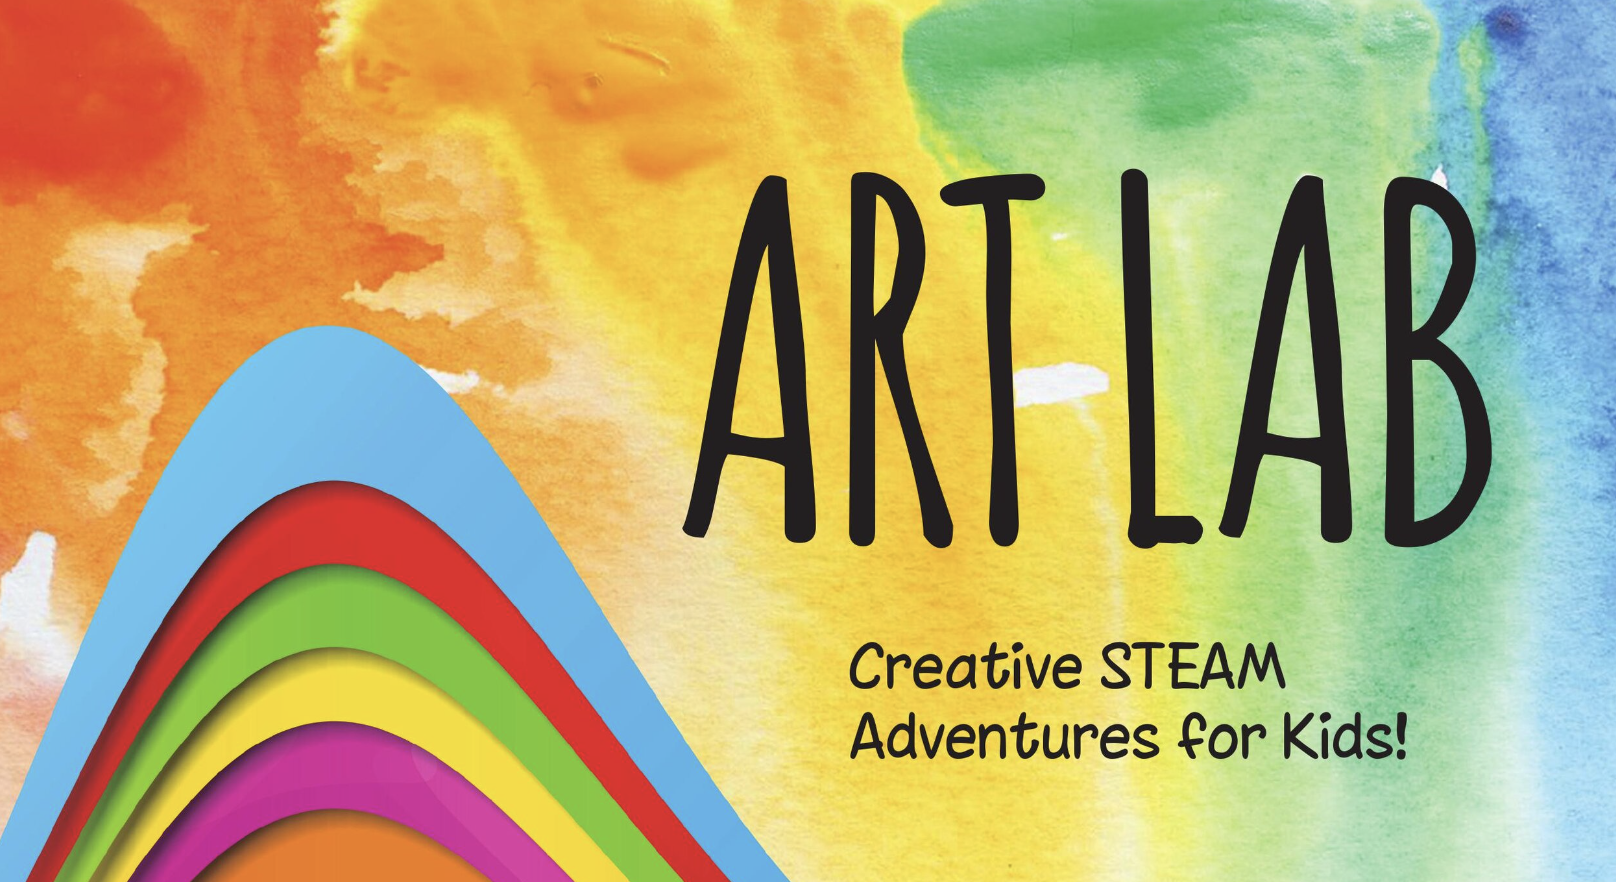 the words ART LAB and Creative STEAM Adventures for Kids! is written in black over a rainbow watercolor background with multicolored bands emerging from the bottom of the image in a hill shape for aesthetic purposes.